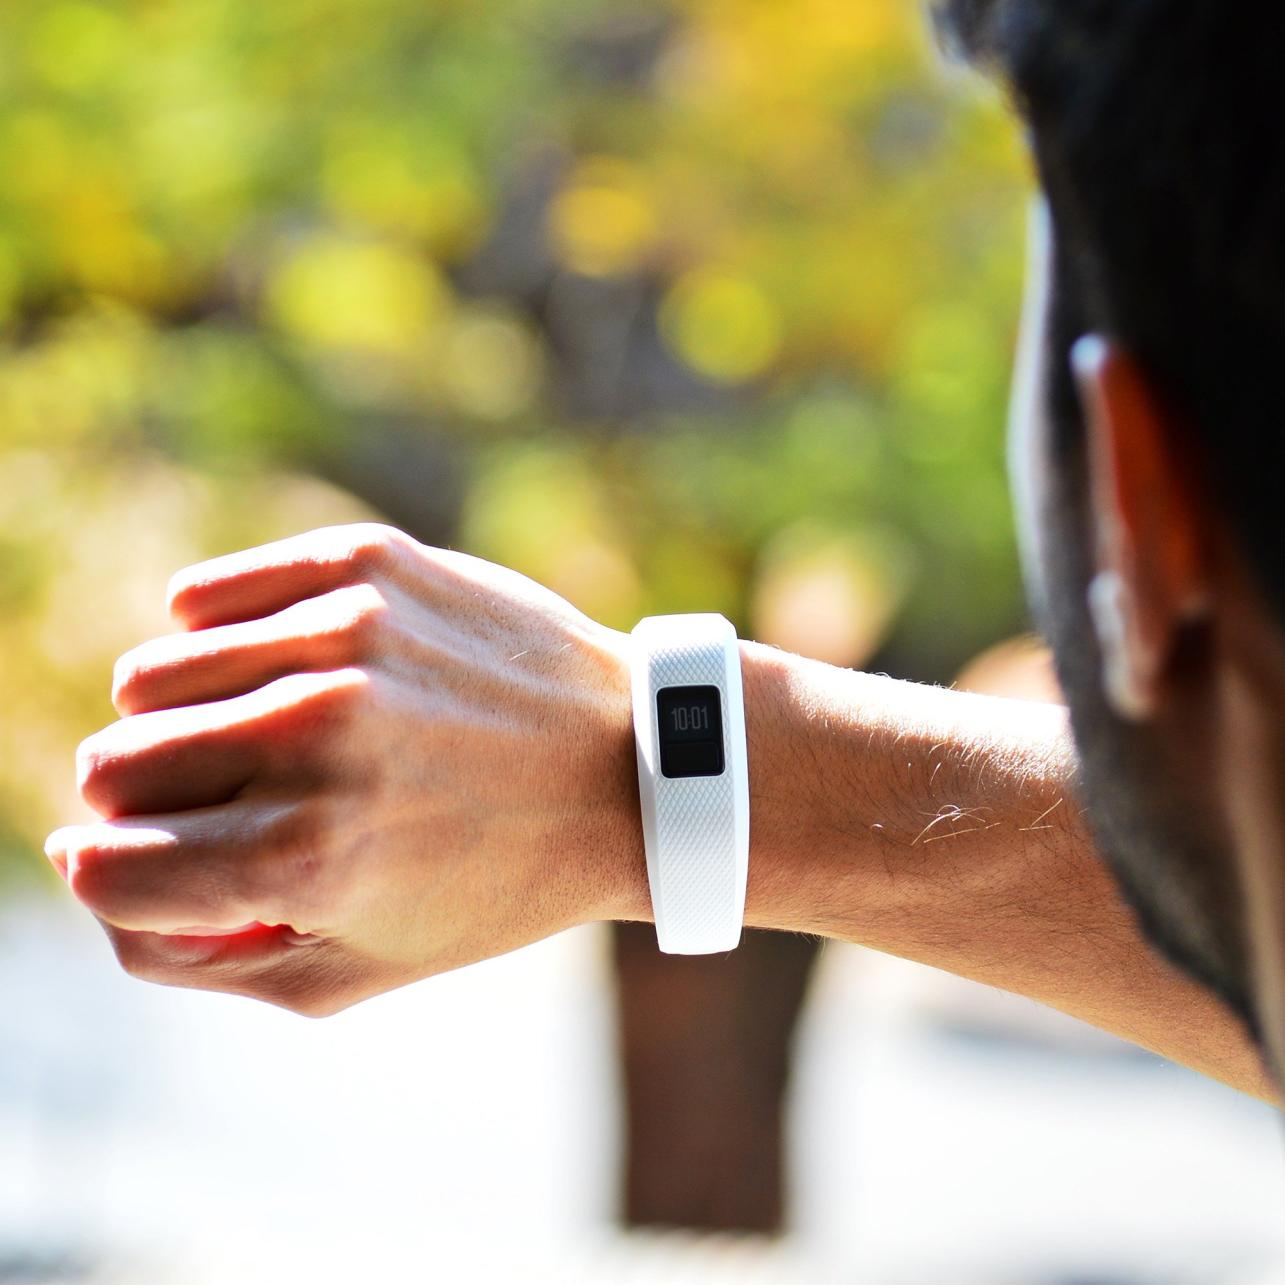 What Are Some of the Latest Trends in Fitness Apps and Activity Trackers?